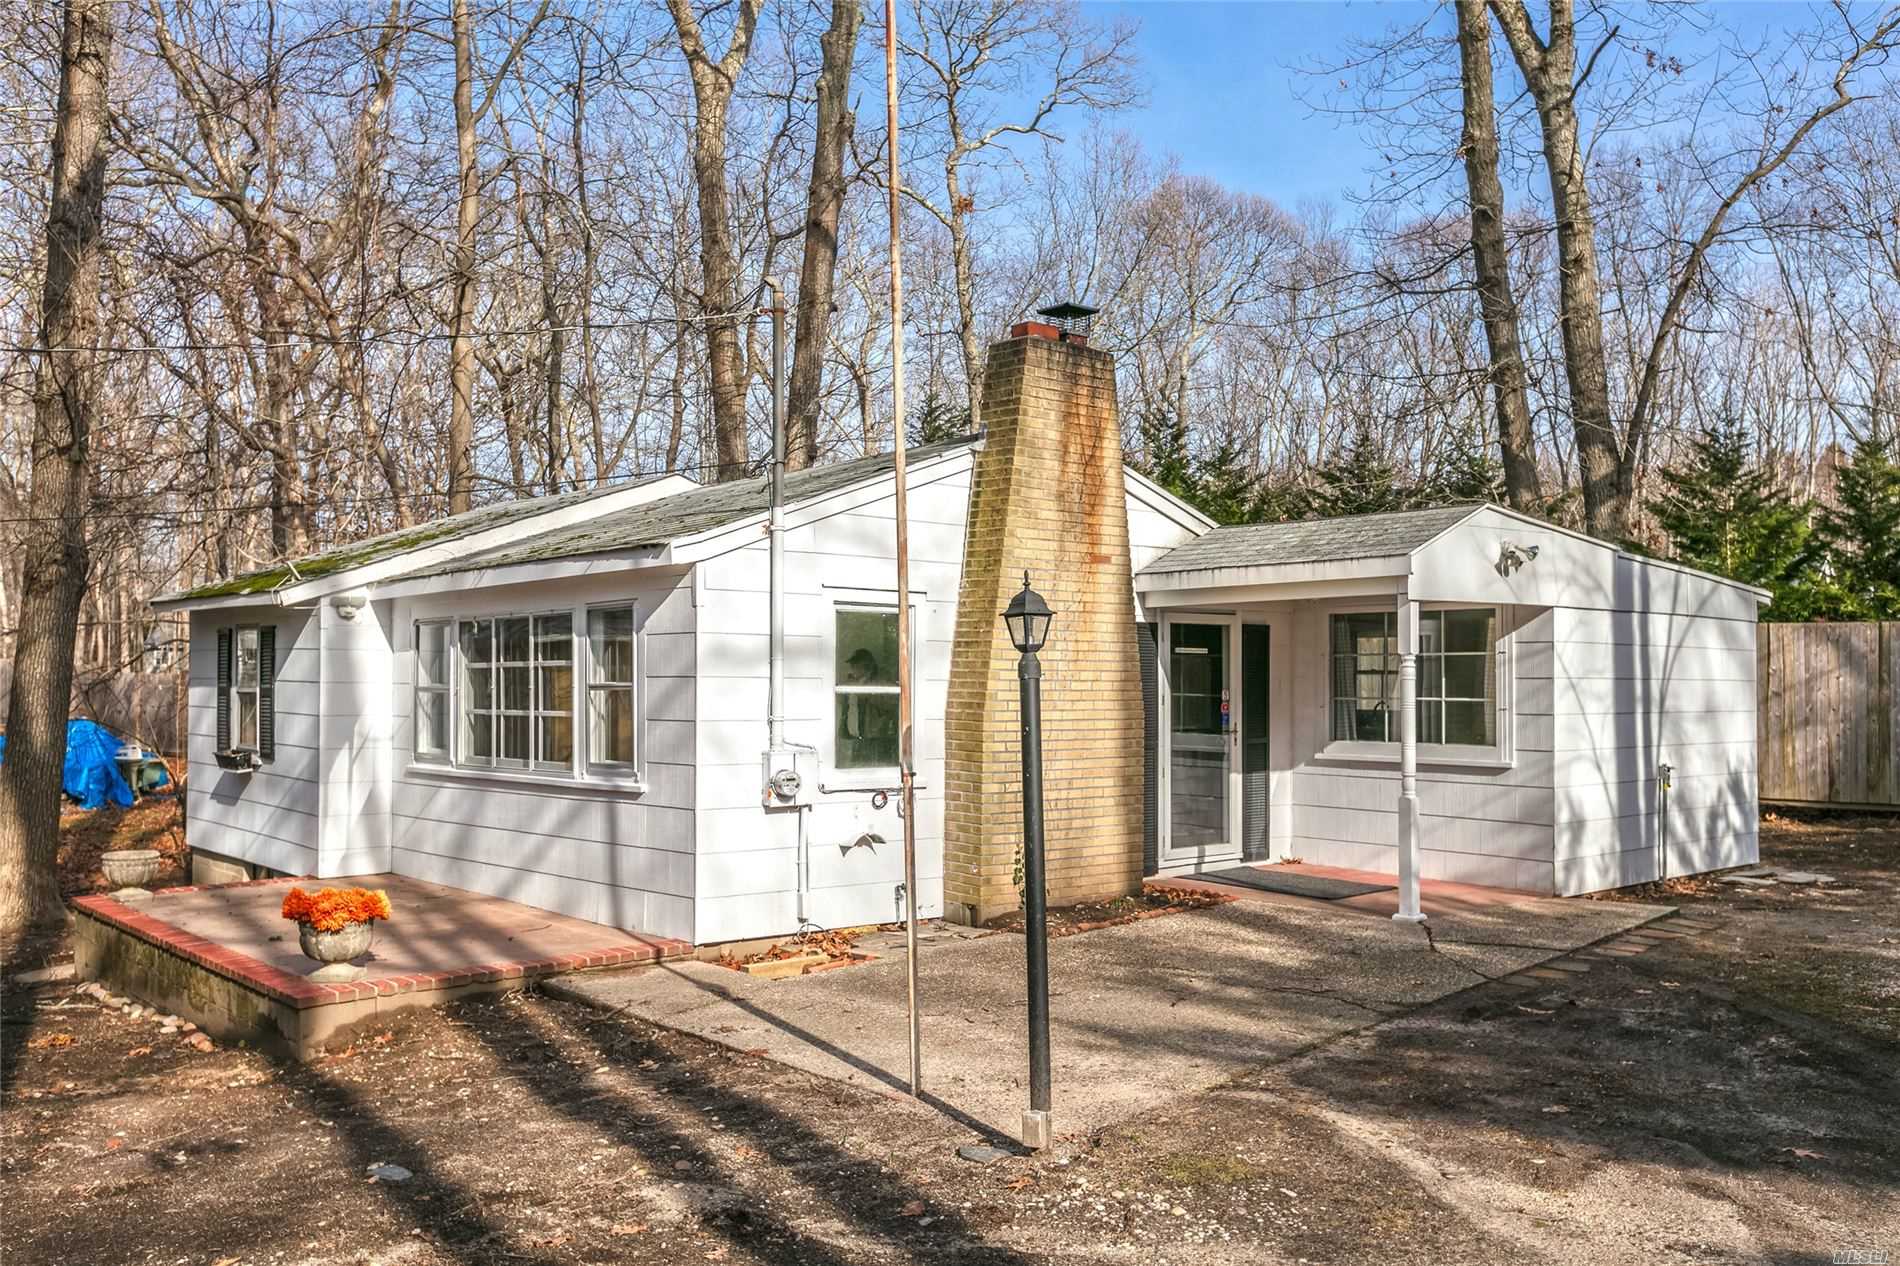 Come view this cute-as-a-button North Fork getaway, quietly tucked away in the woods near the east end of Great Hog Neck. There&rsquo;s a beautiful private beach for the Paradise Shores community at the end of the lane. Don&rsquo;t miss out!